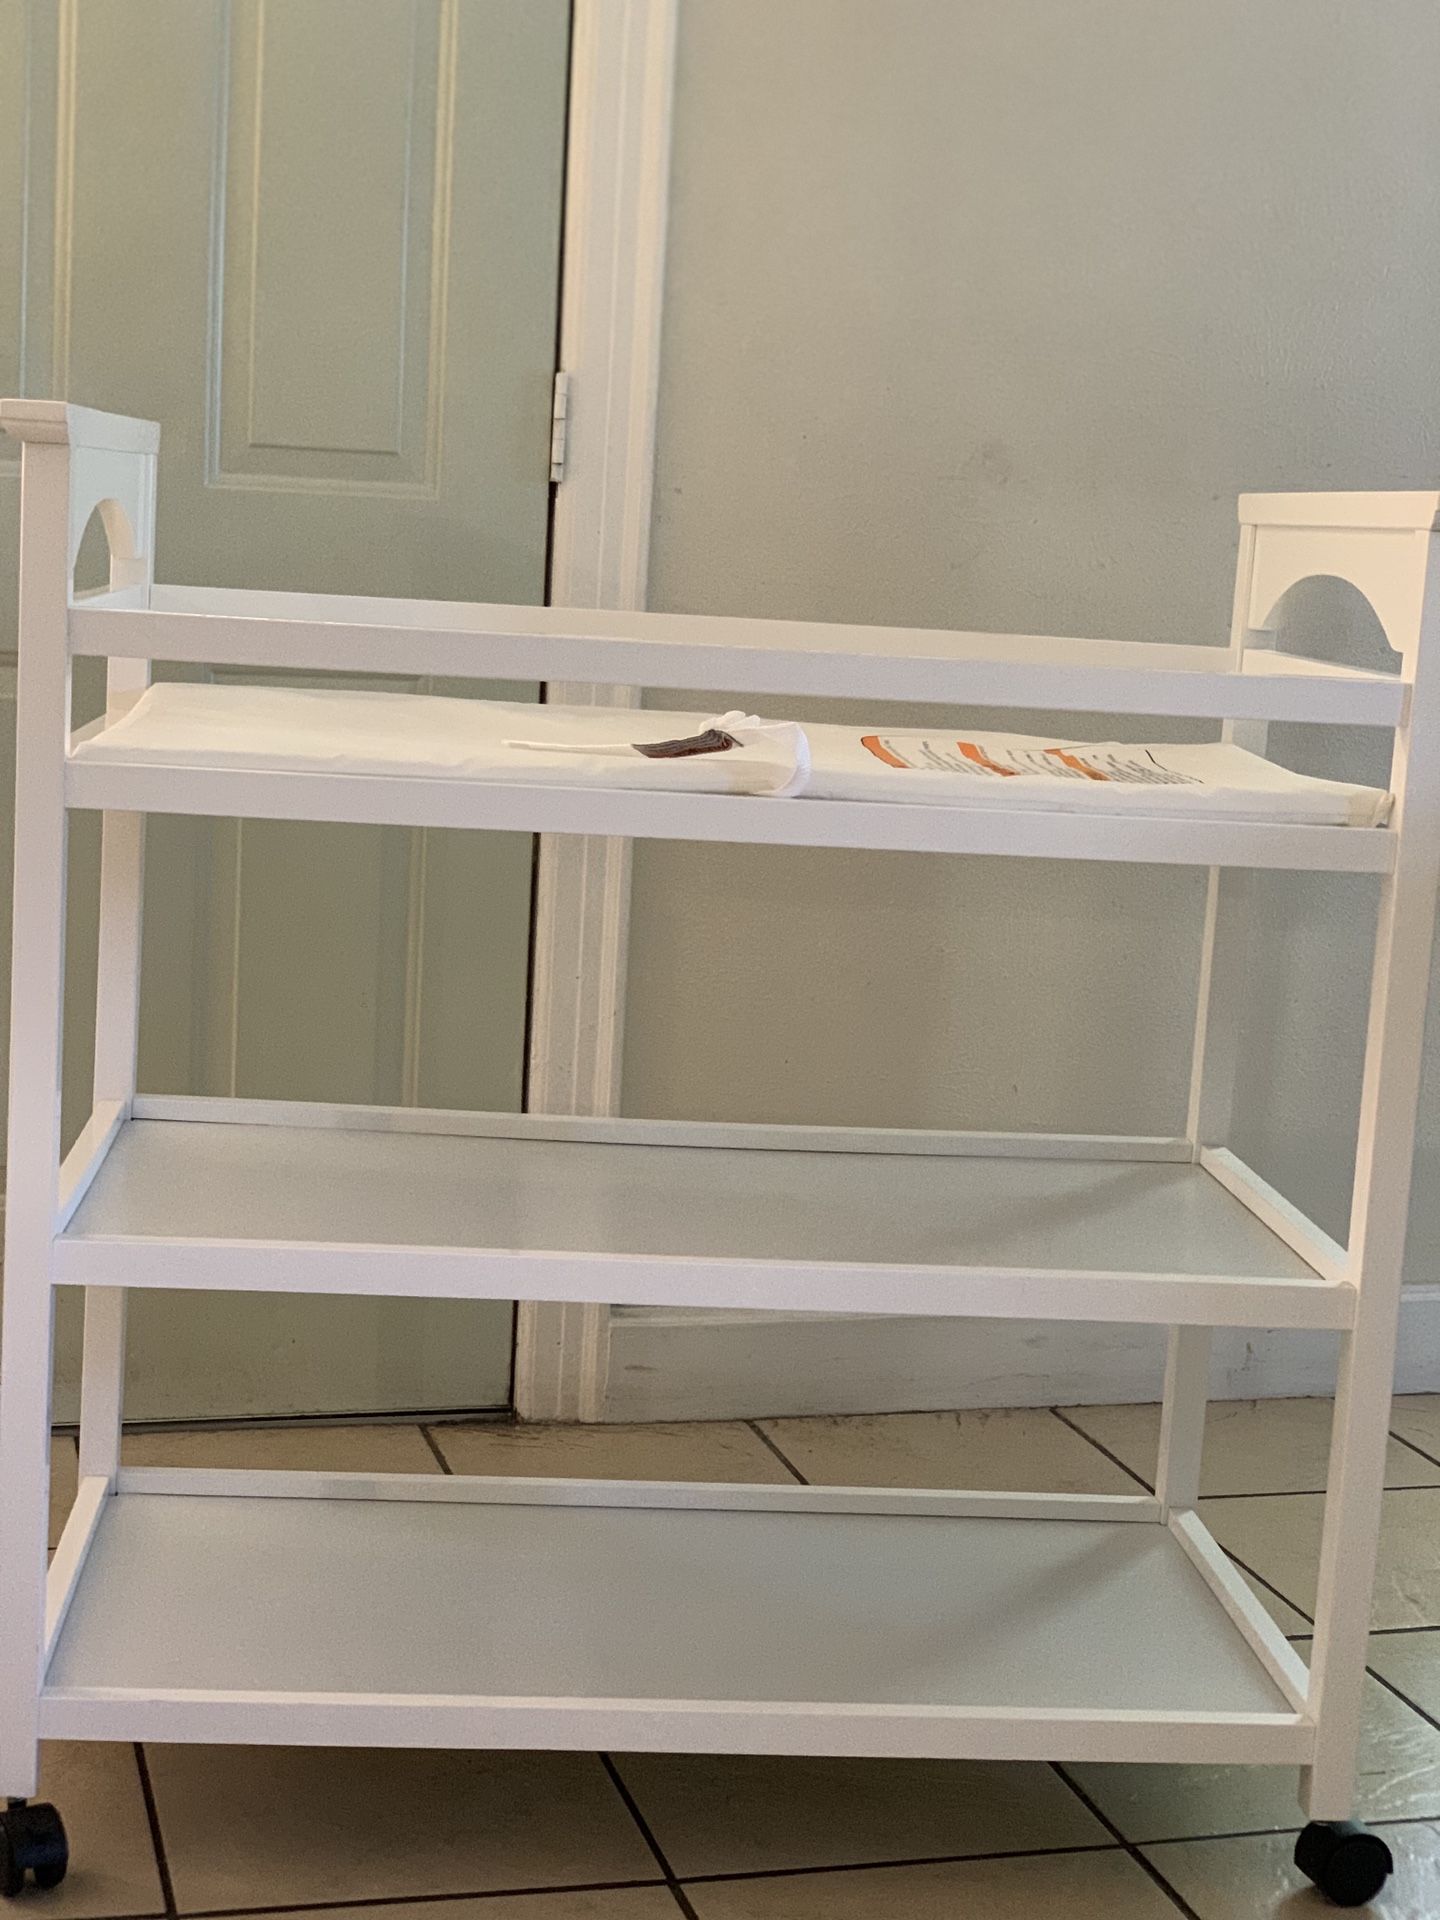 Cradle & changing table